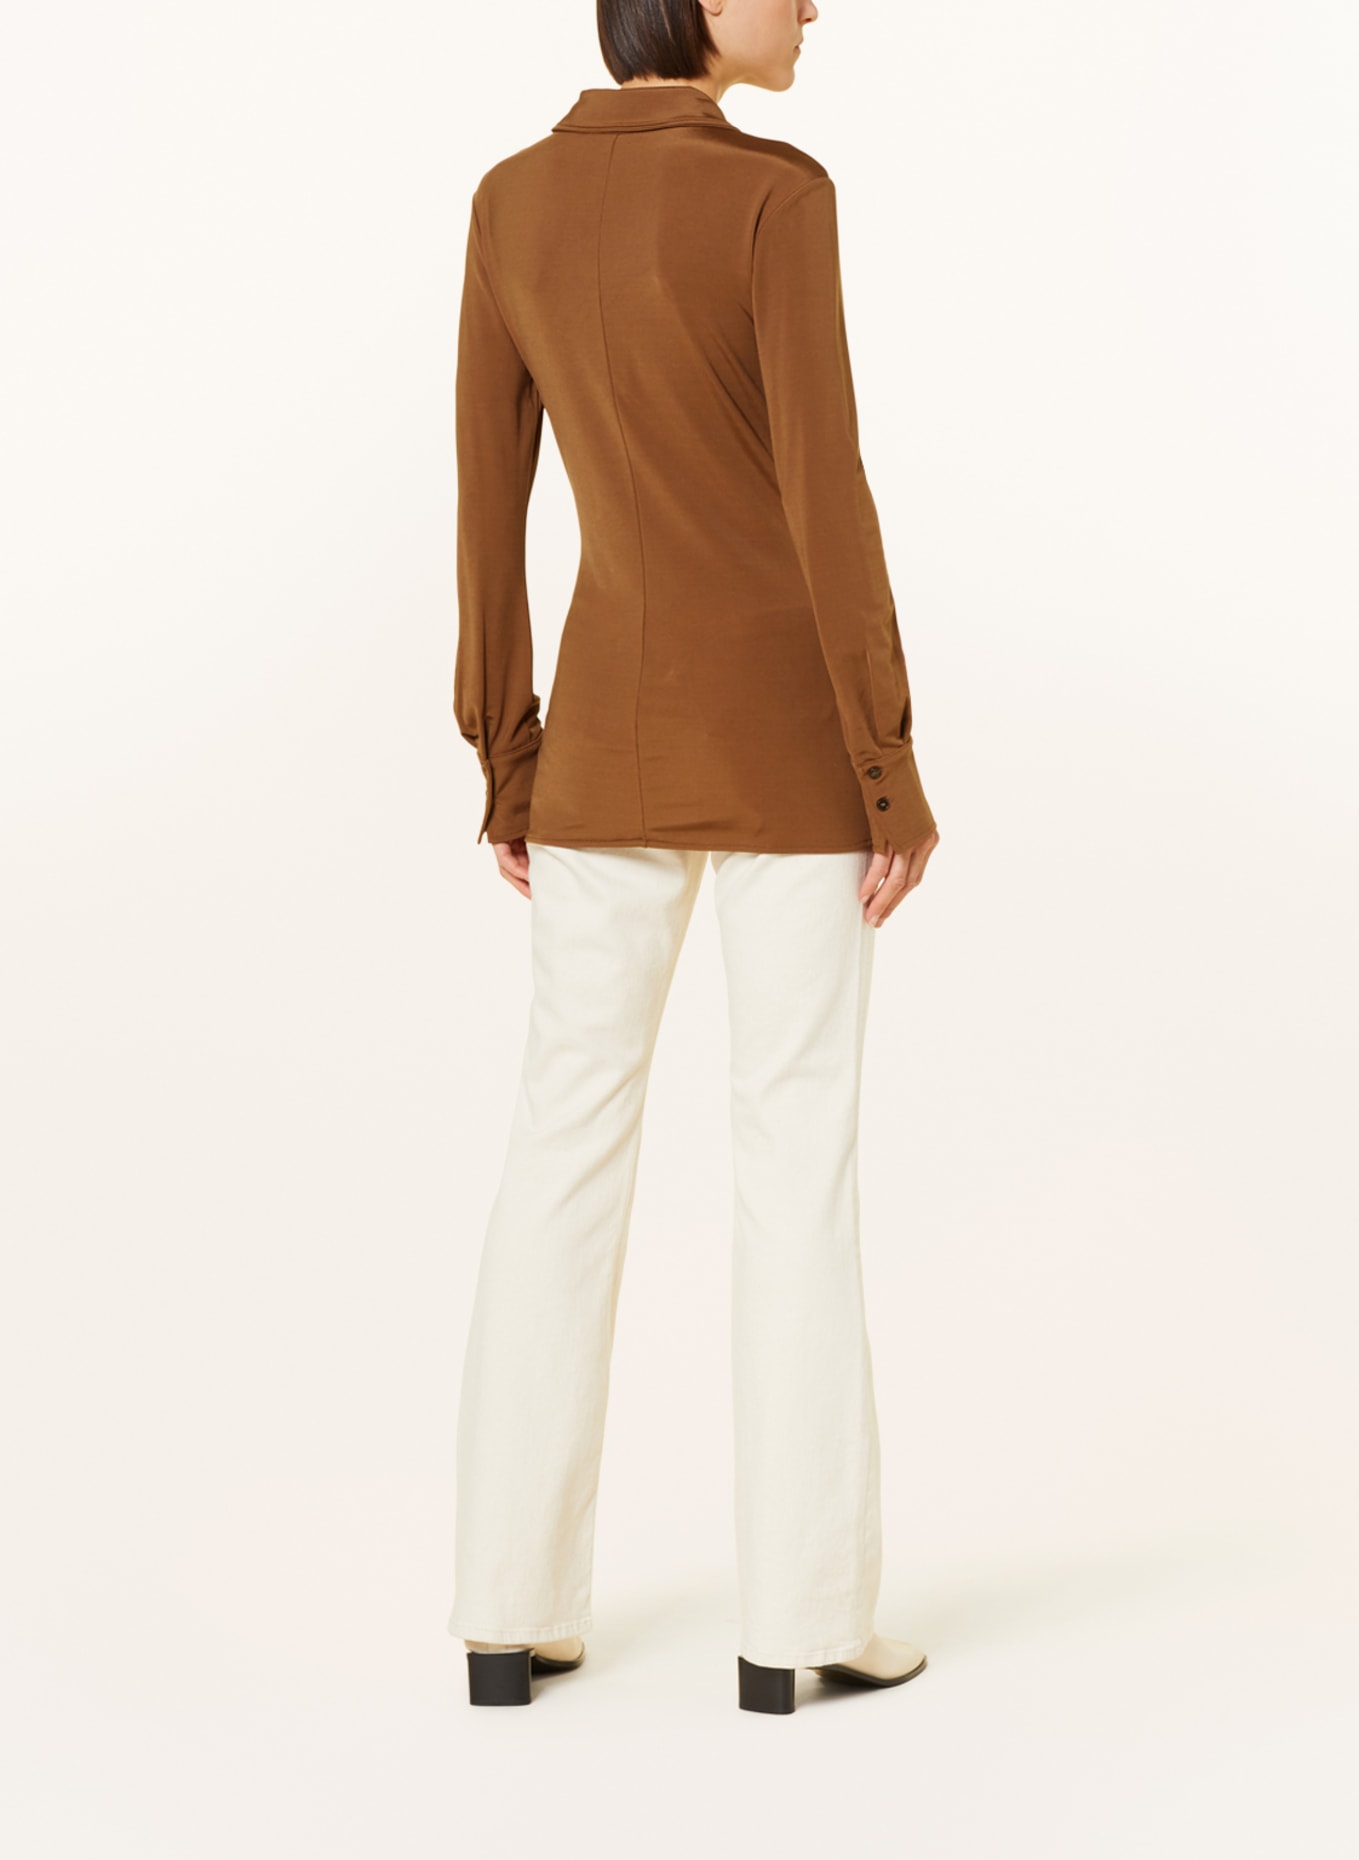 CLOSED Shirt blouse made of jersey, Color: BROWN (Image 3)